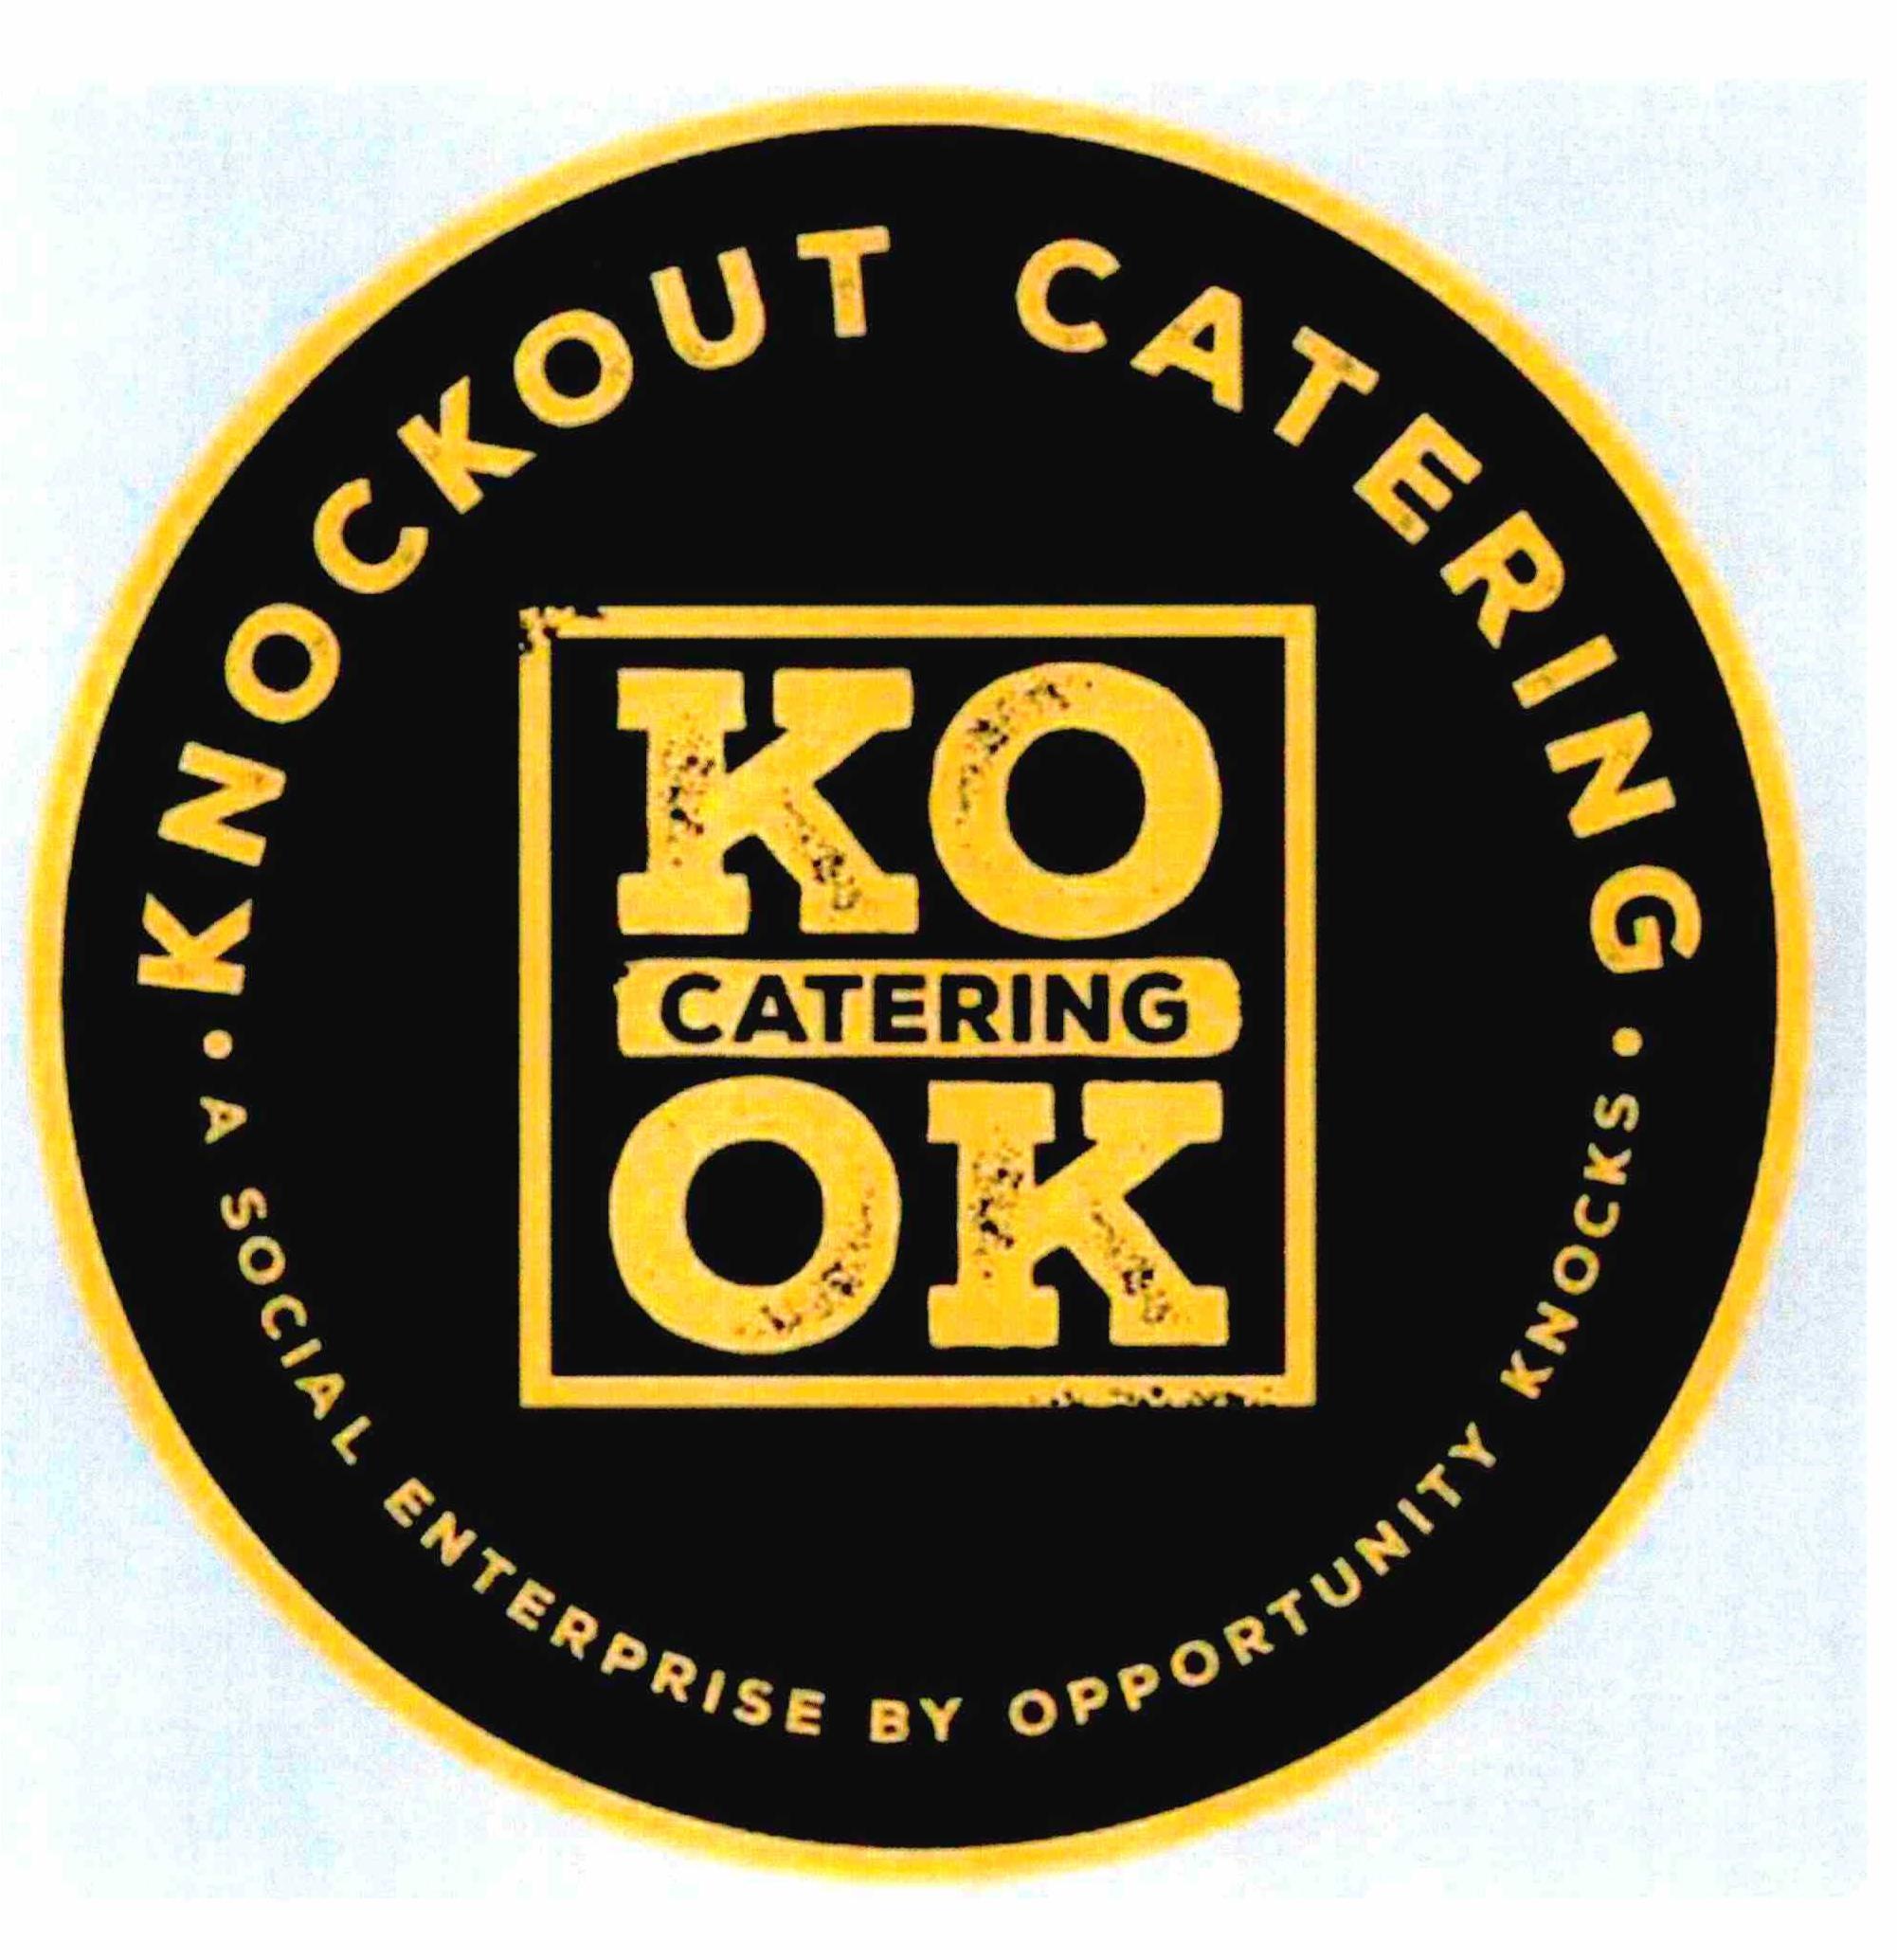  KNOCKOUT CATERING KO CATERING OK